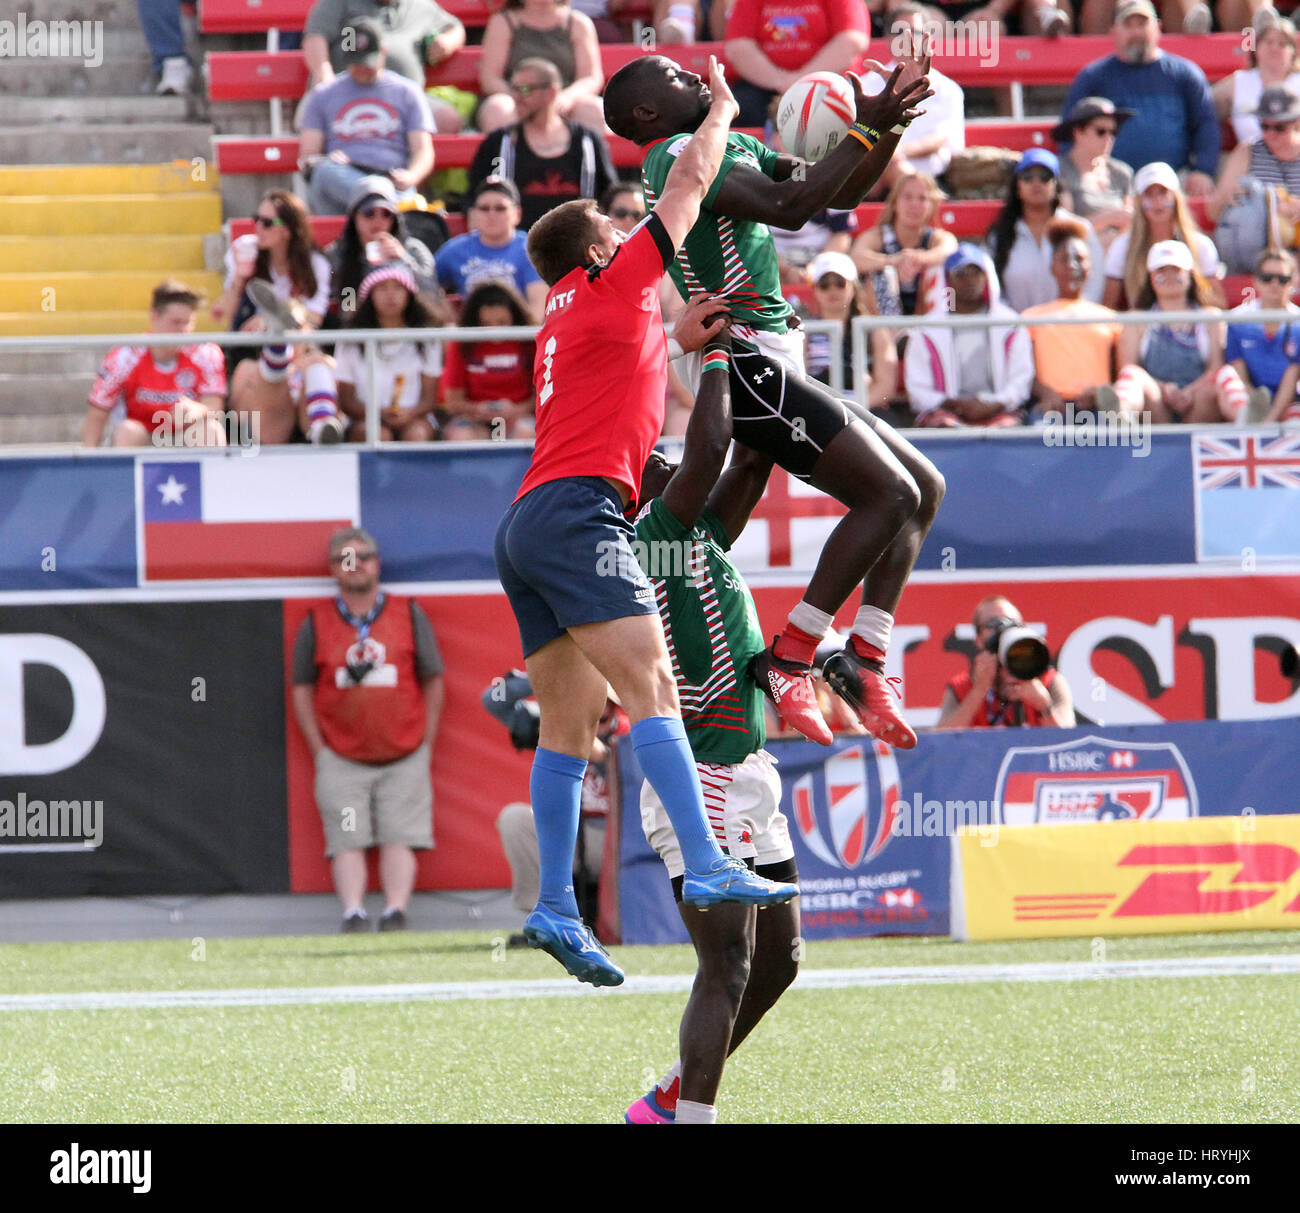 March 5, 2017 - Kenyan Billy Odhiambo is tackled by Russian Dmitry Suhkin during the 2017 USA Sevens International Rugby Tournament game between Kenya and Russia on March 4, 2017 at Sam Boyd Stadium in Las Vegas, Nevada Credit: Marcel Thomas/ZUMA Wire/Alamy Live News Stock Photo